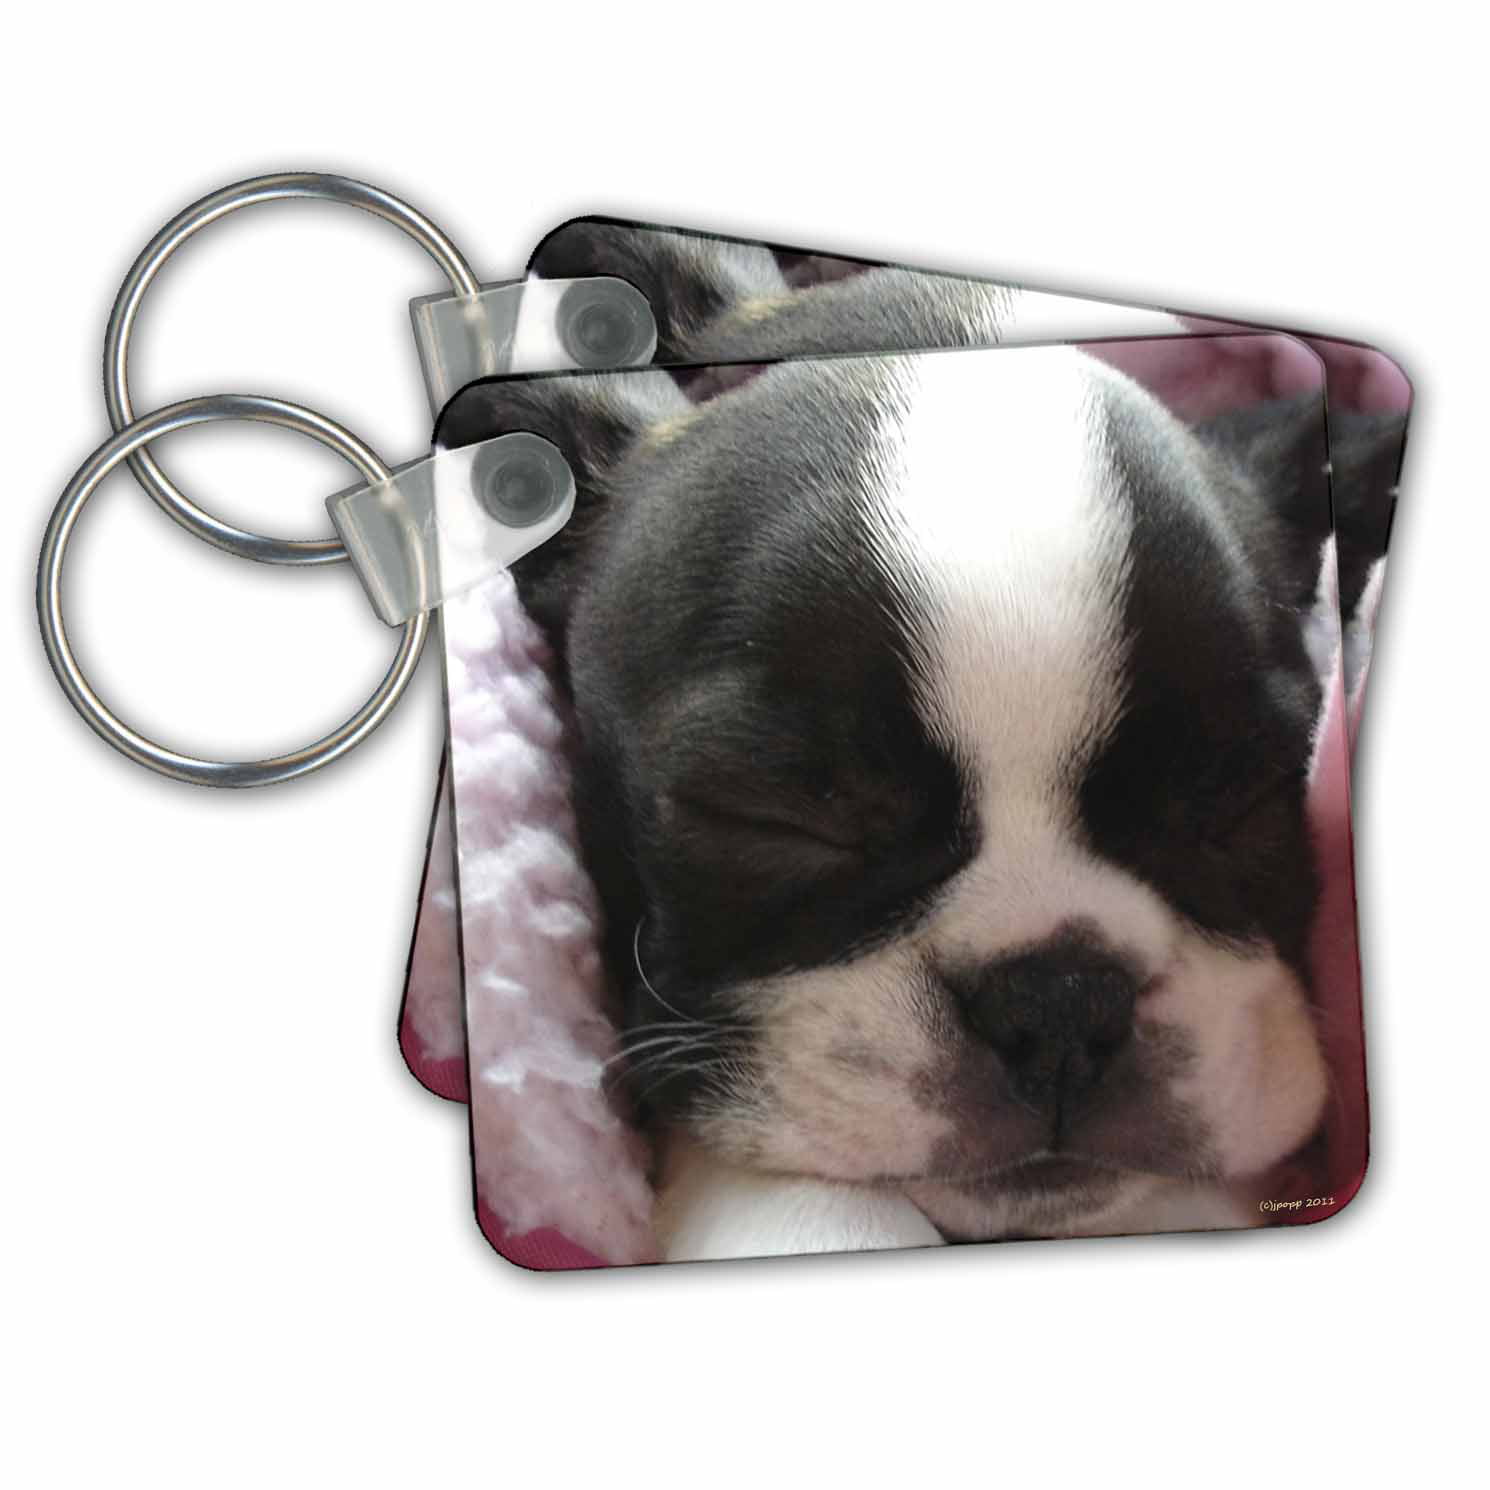 For dog shows. Boston Terrier arm band ring number holder with clip 